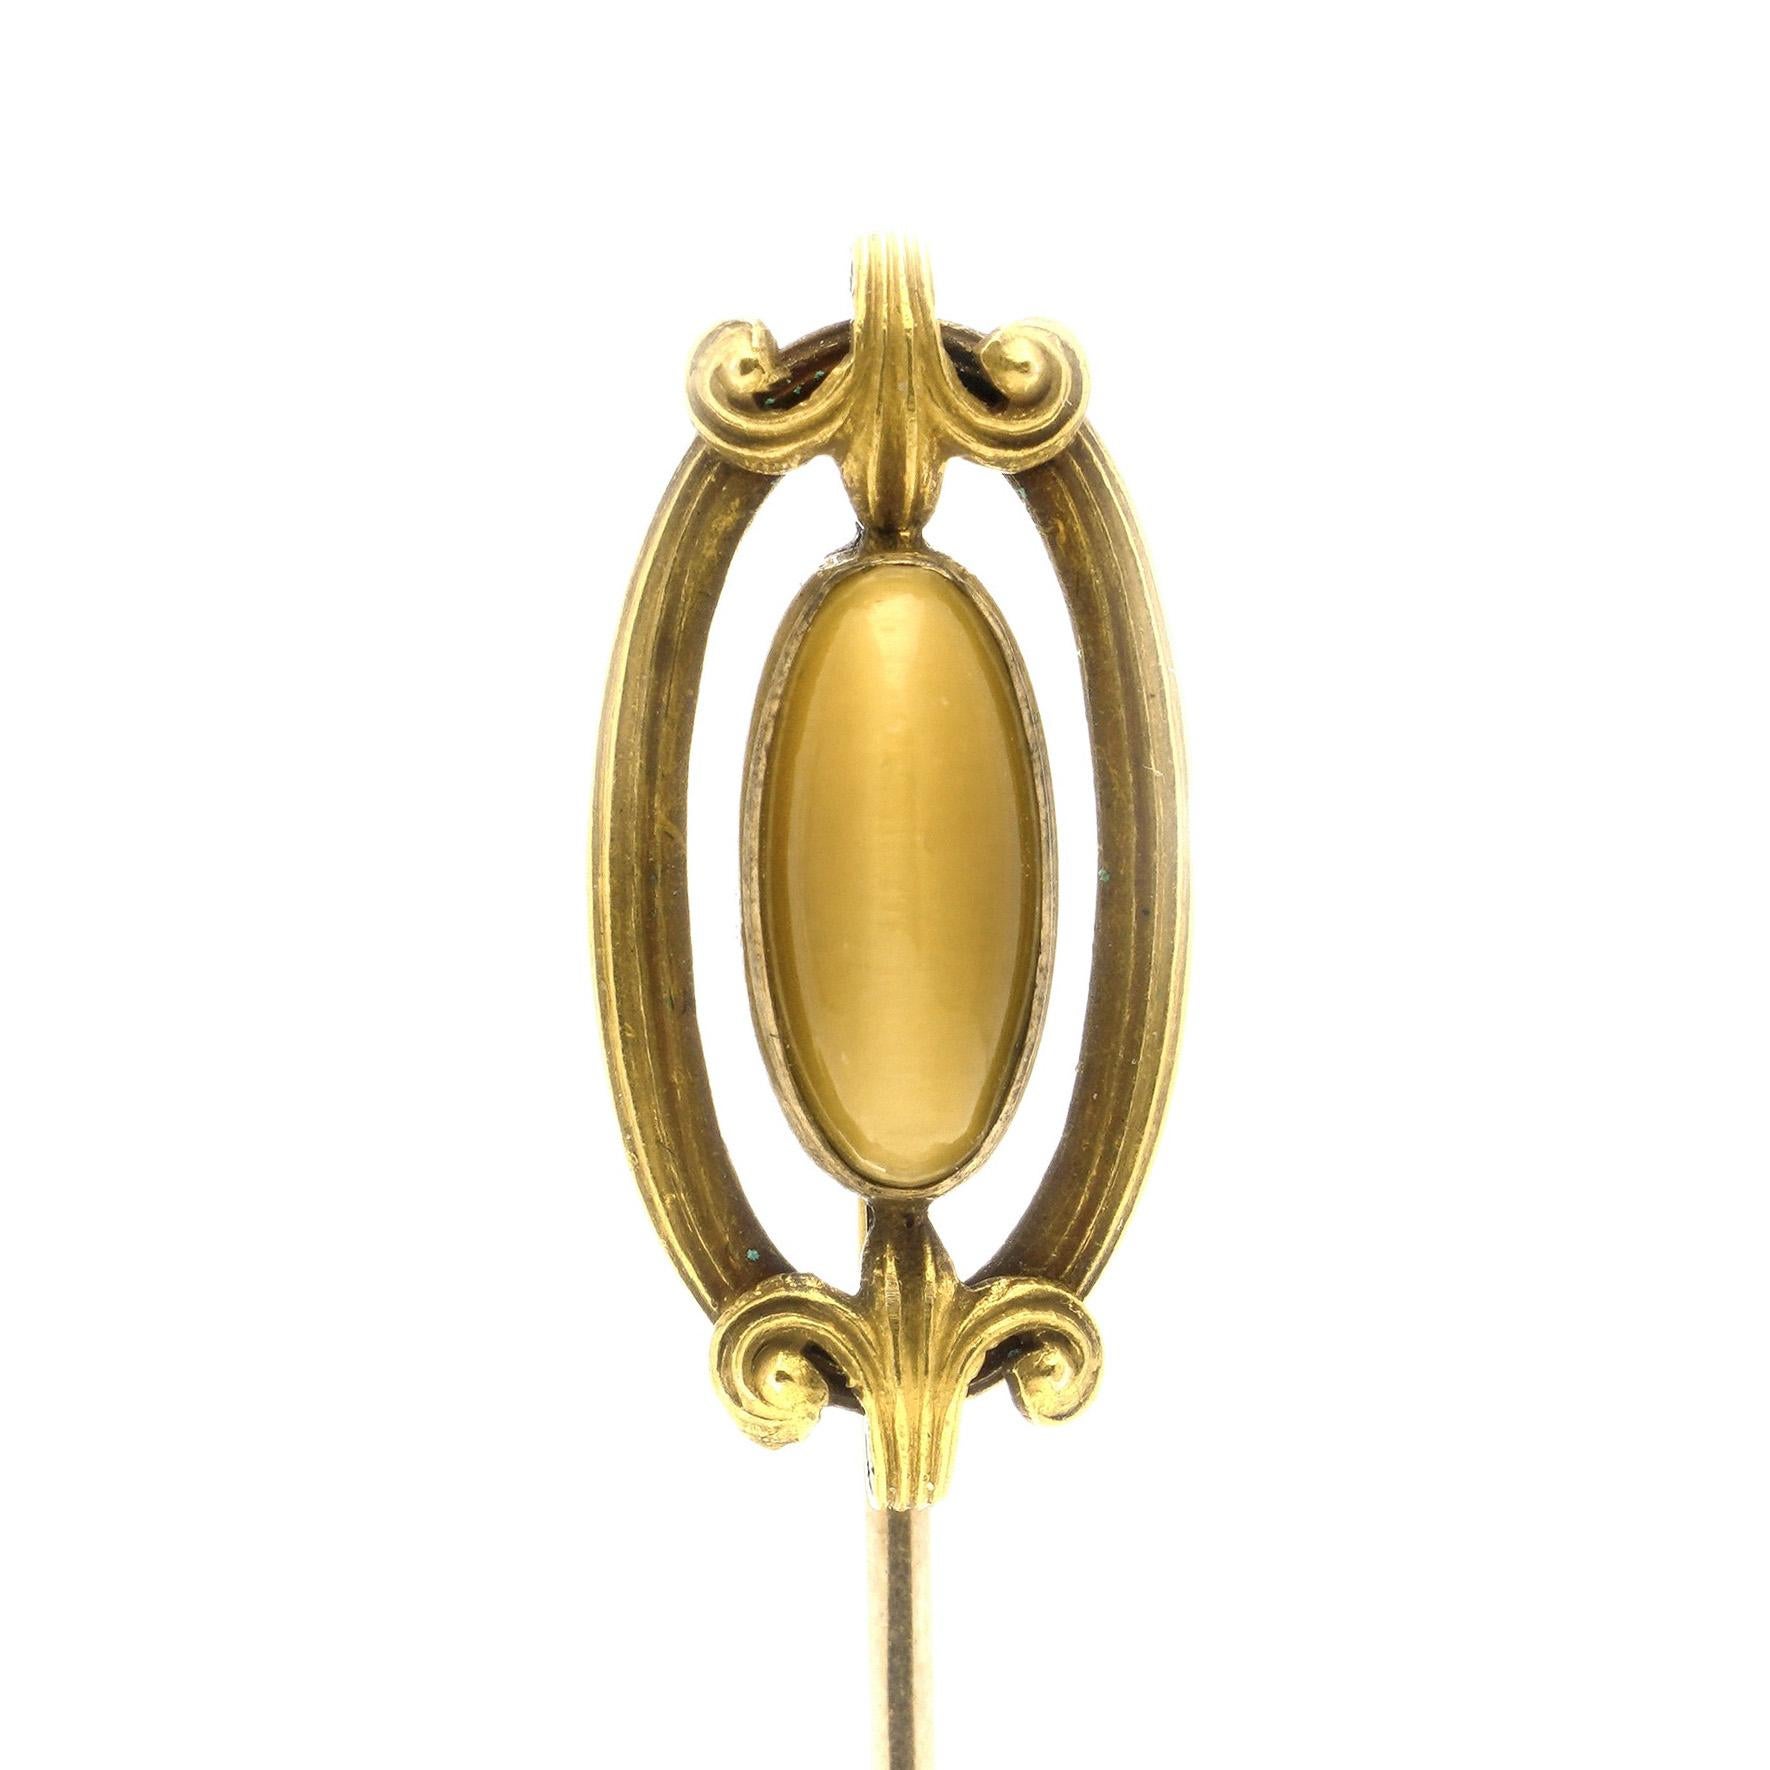 Vintage 14kt. yellow gold hat pin brooch with tiger's eye. 
Hallmarked with 14kt. gold. 

Dimensions - 
Length x width: 6.5 x 1.1 cm 
Weight: 2.00 grams

Condition: Pre-owned, has some minor age wear, no damage, great overall condition.